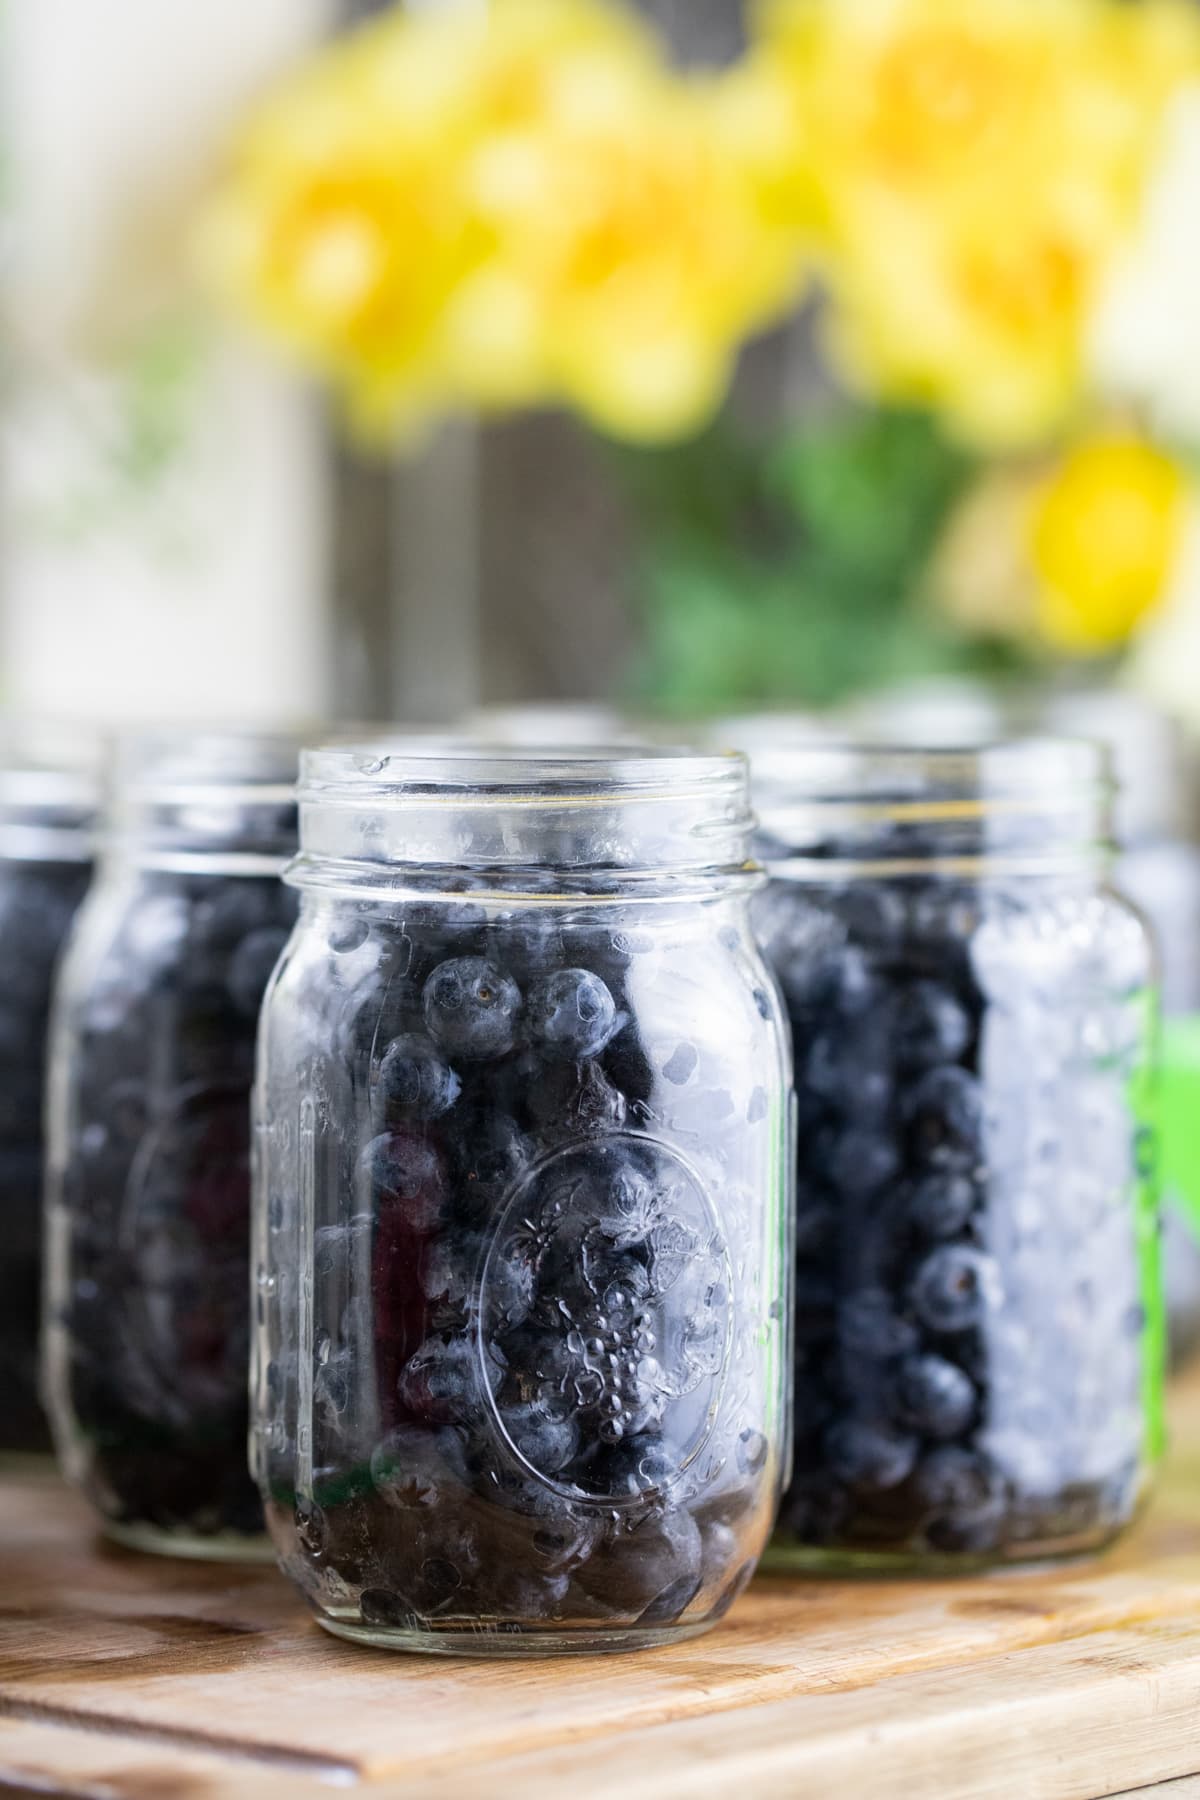 packing the jars with blueberries